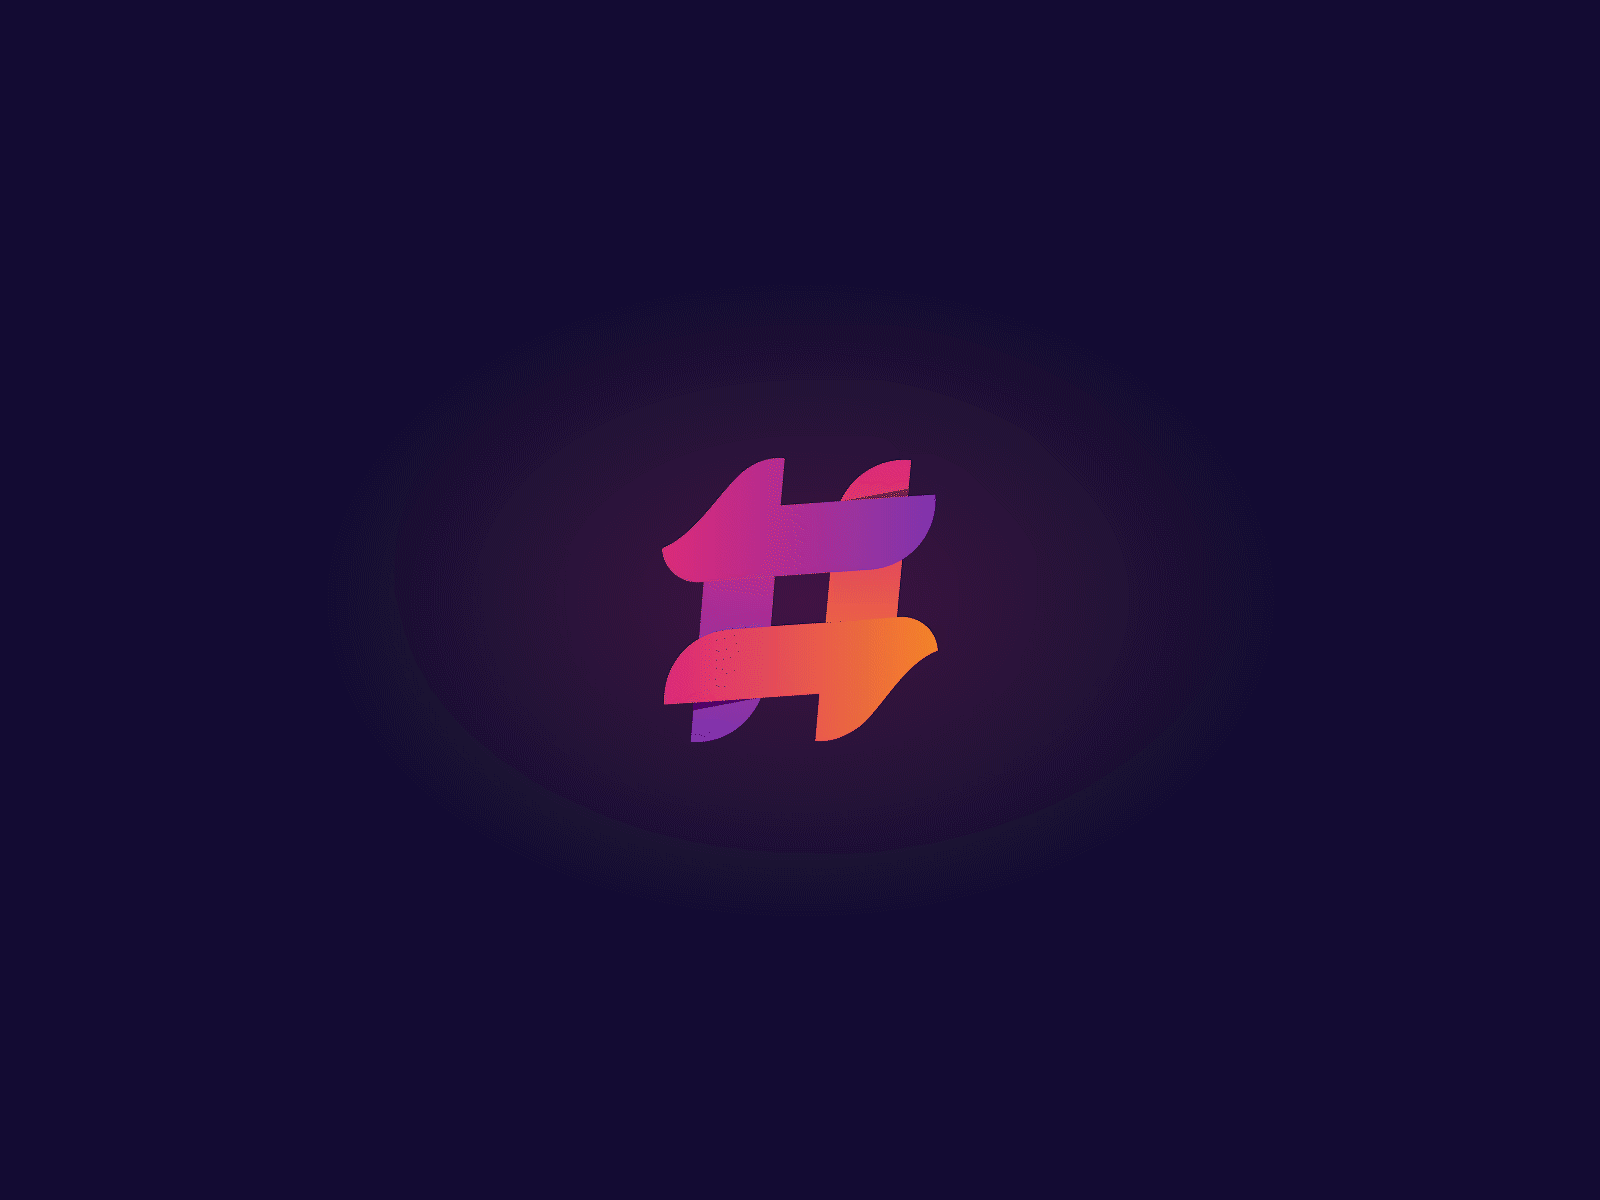 app intro animation for "Hashtag Wizard"